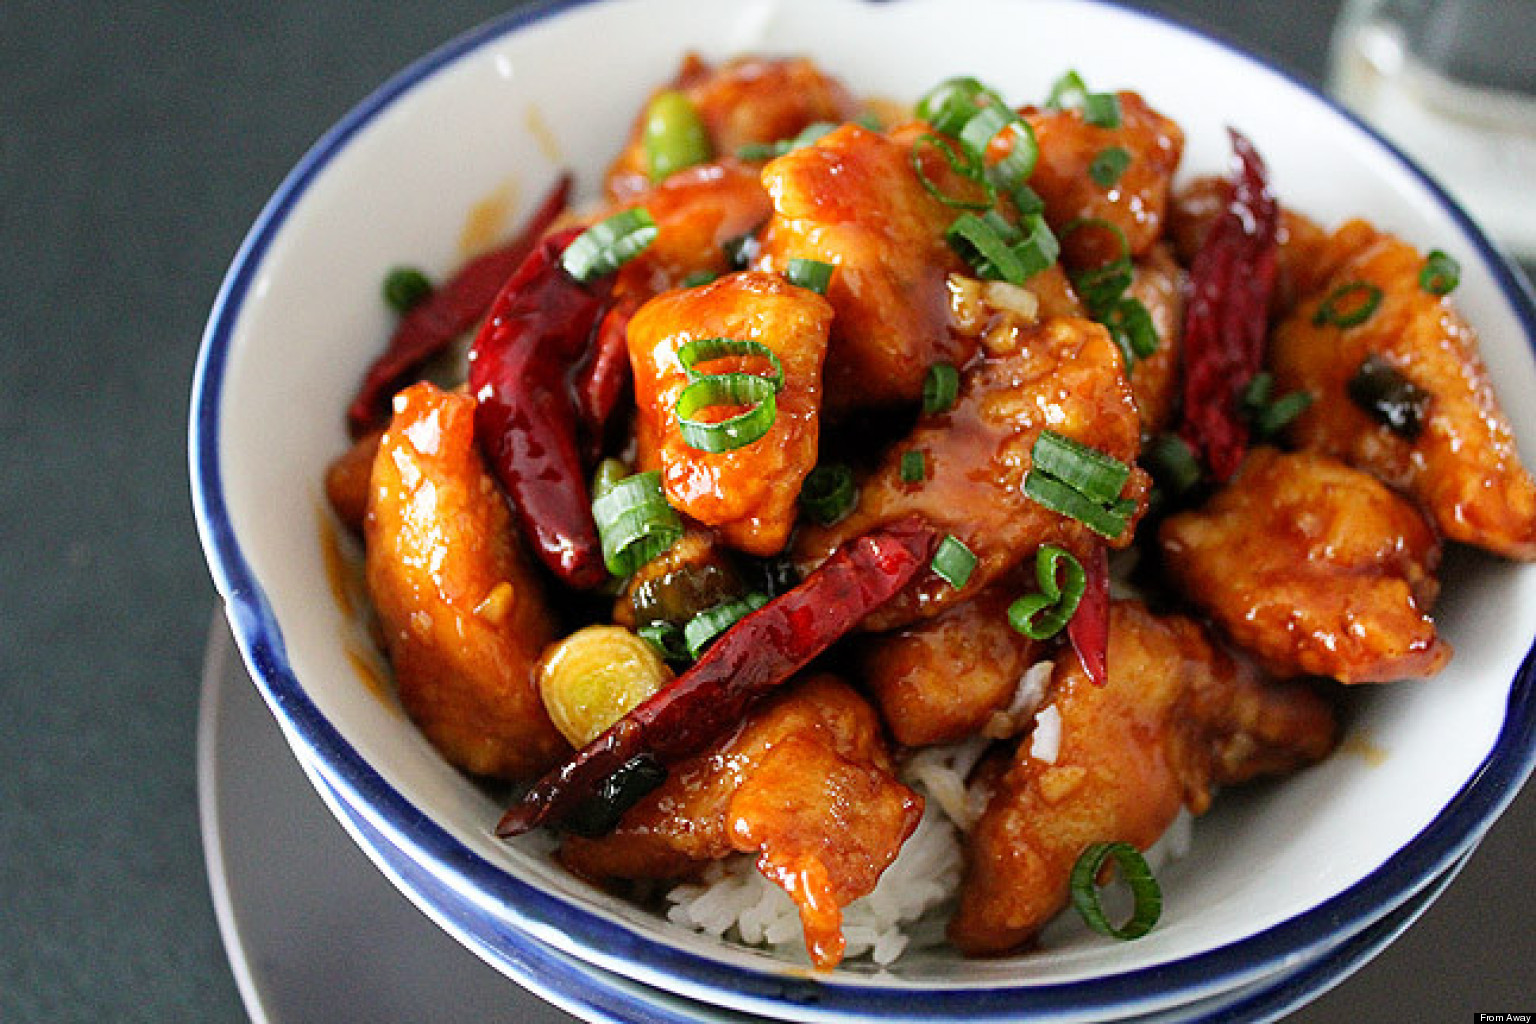 Chinese Takeout Recipes To Make At Home (PHOTOS) | HuffPost